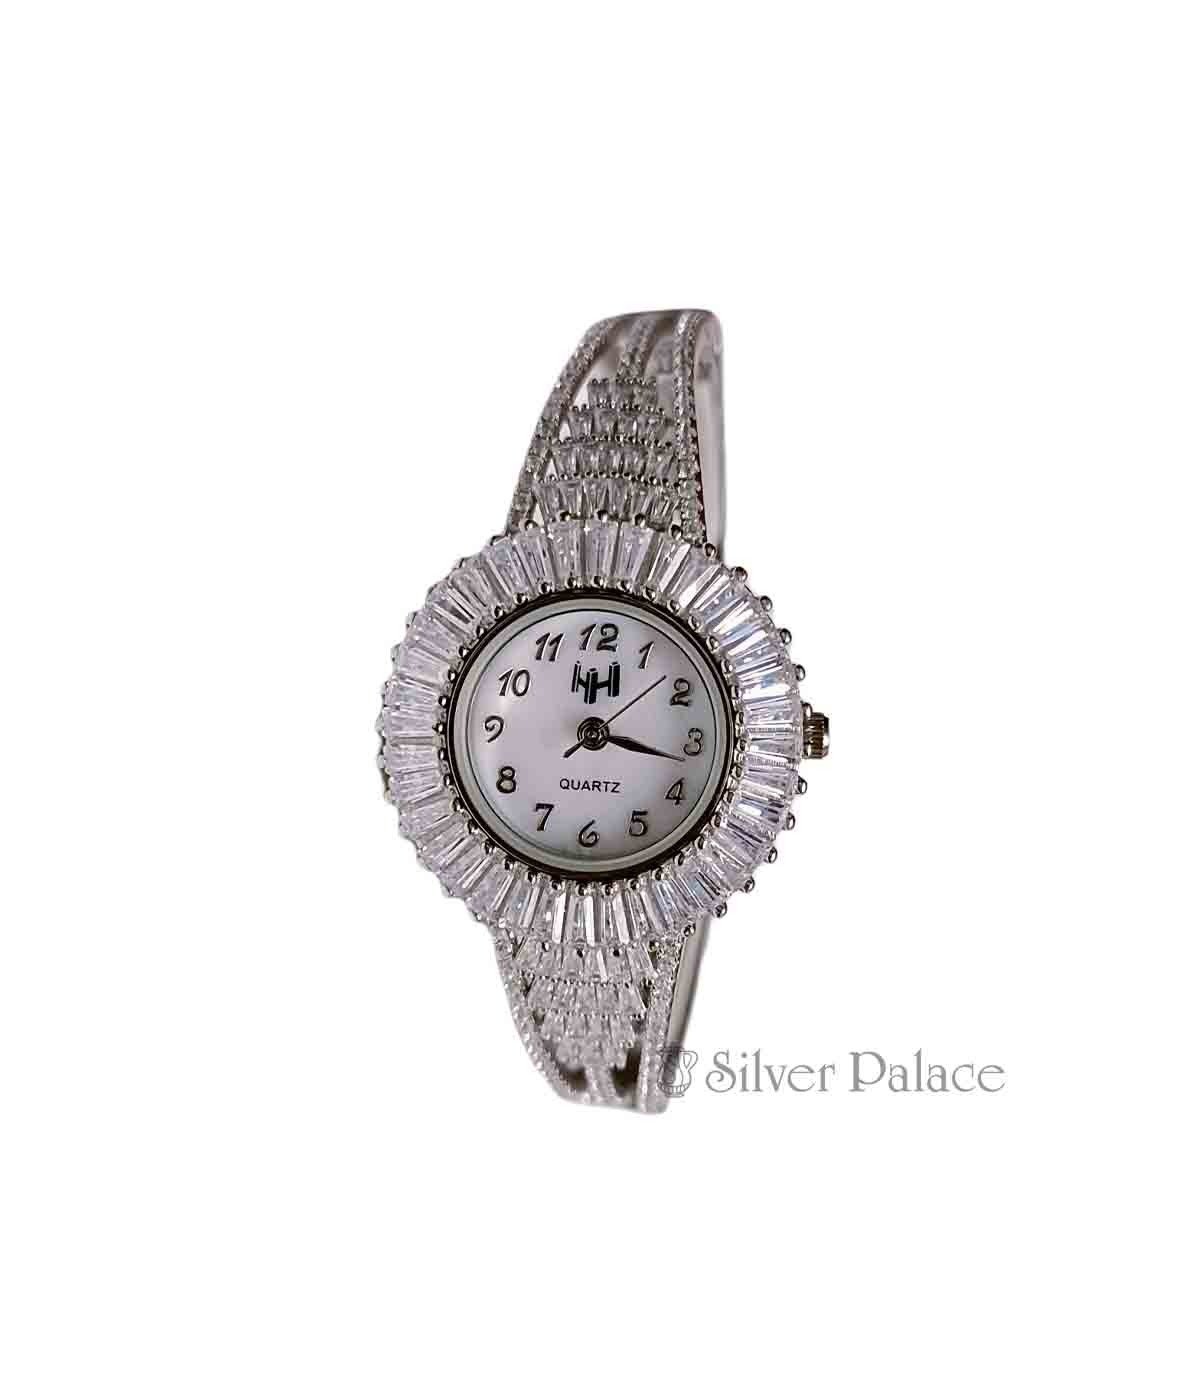 92.5 STERLING SILVER CUBIC ZIRCONIA STONE STUDED ADJUSTABLE STRAP WATCH